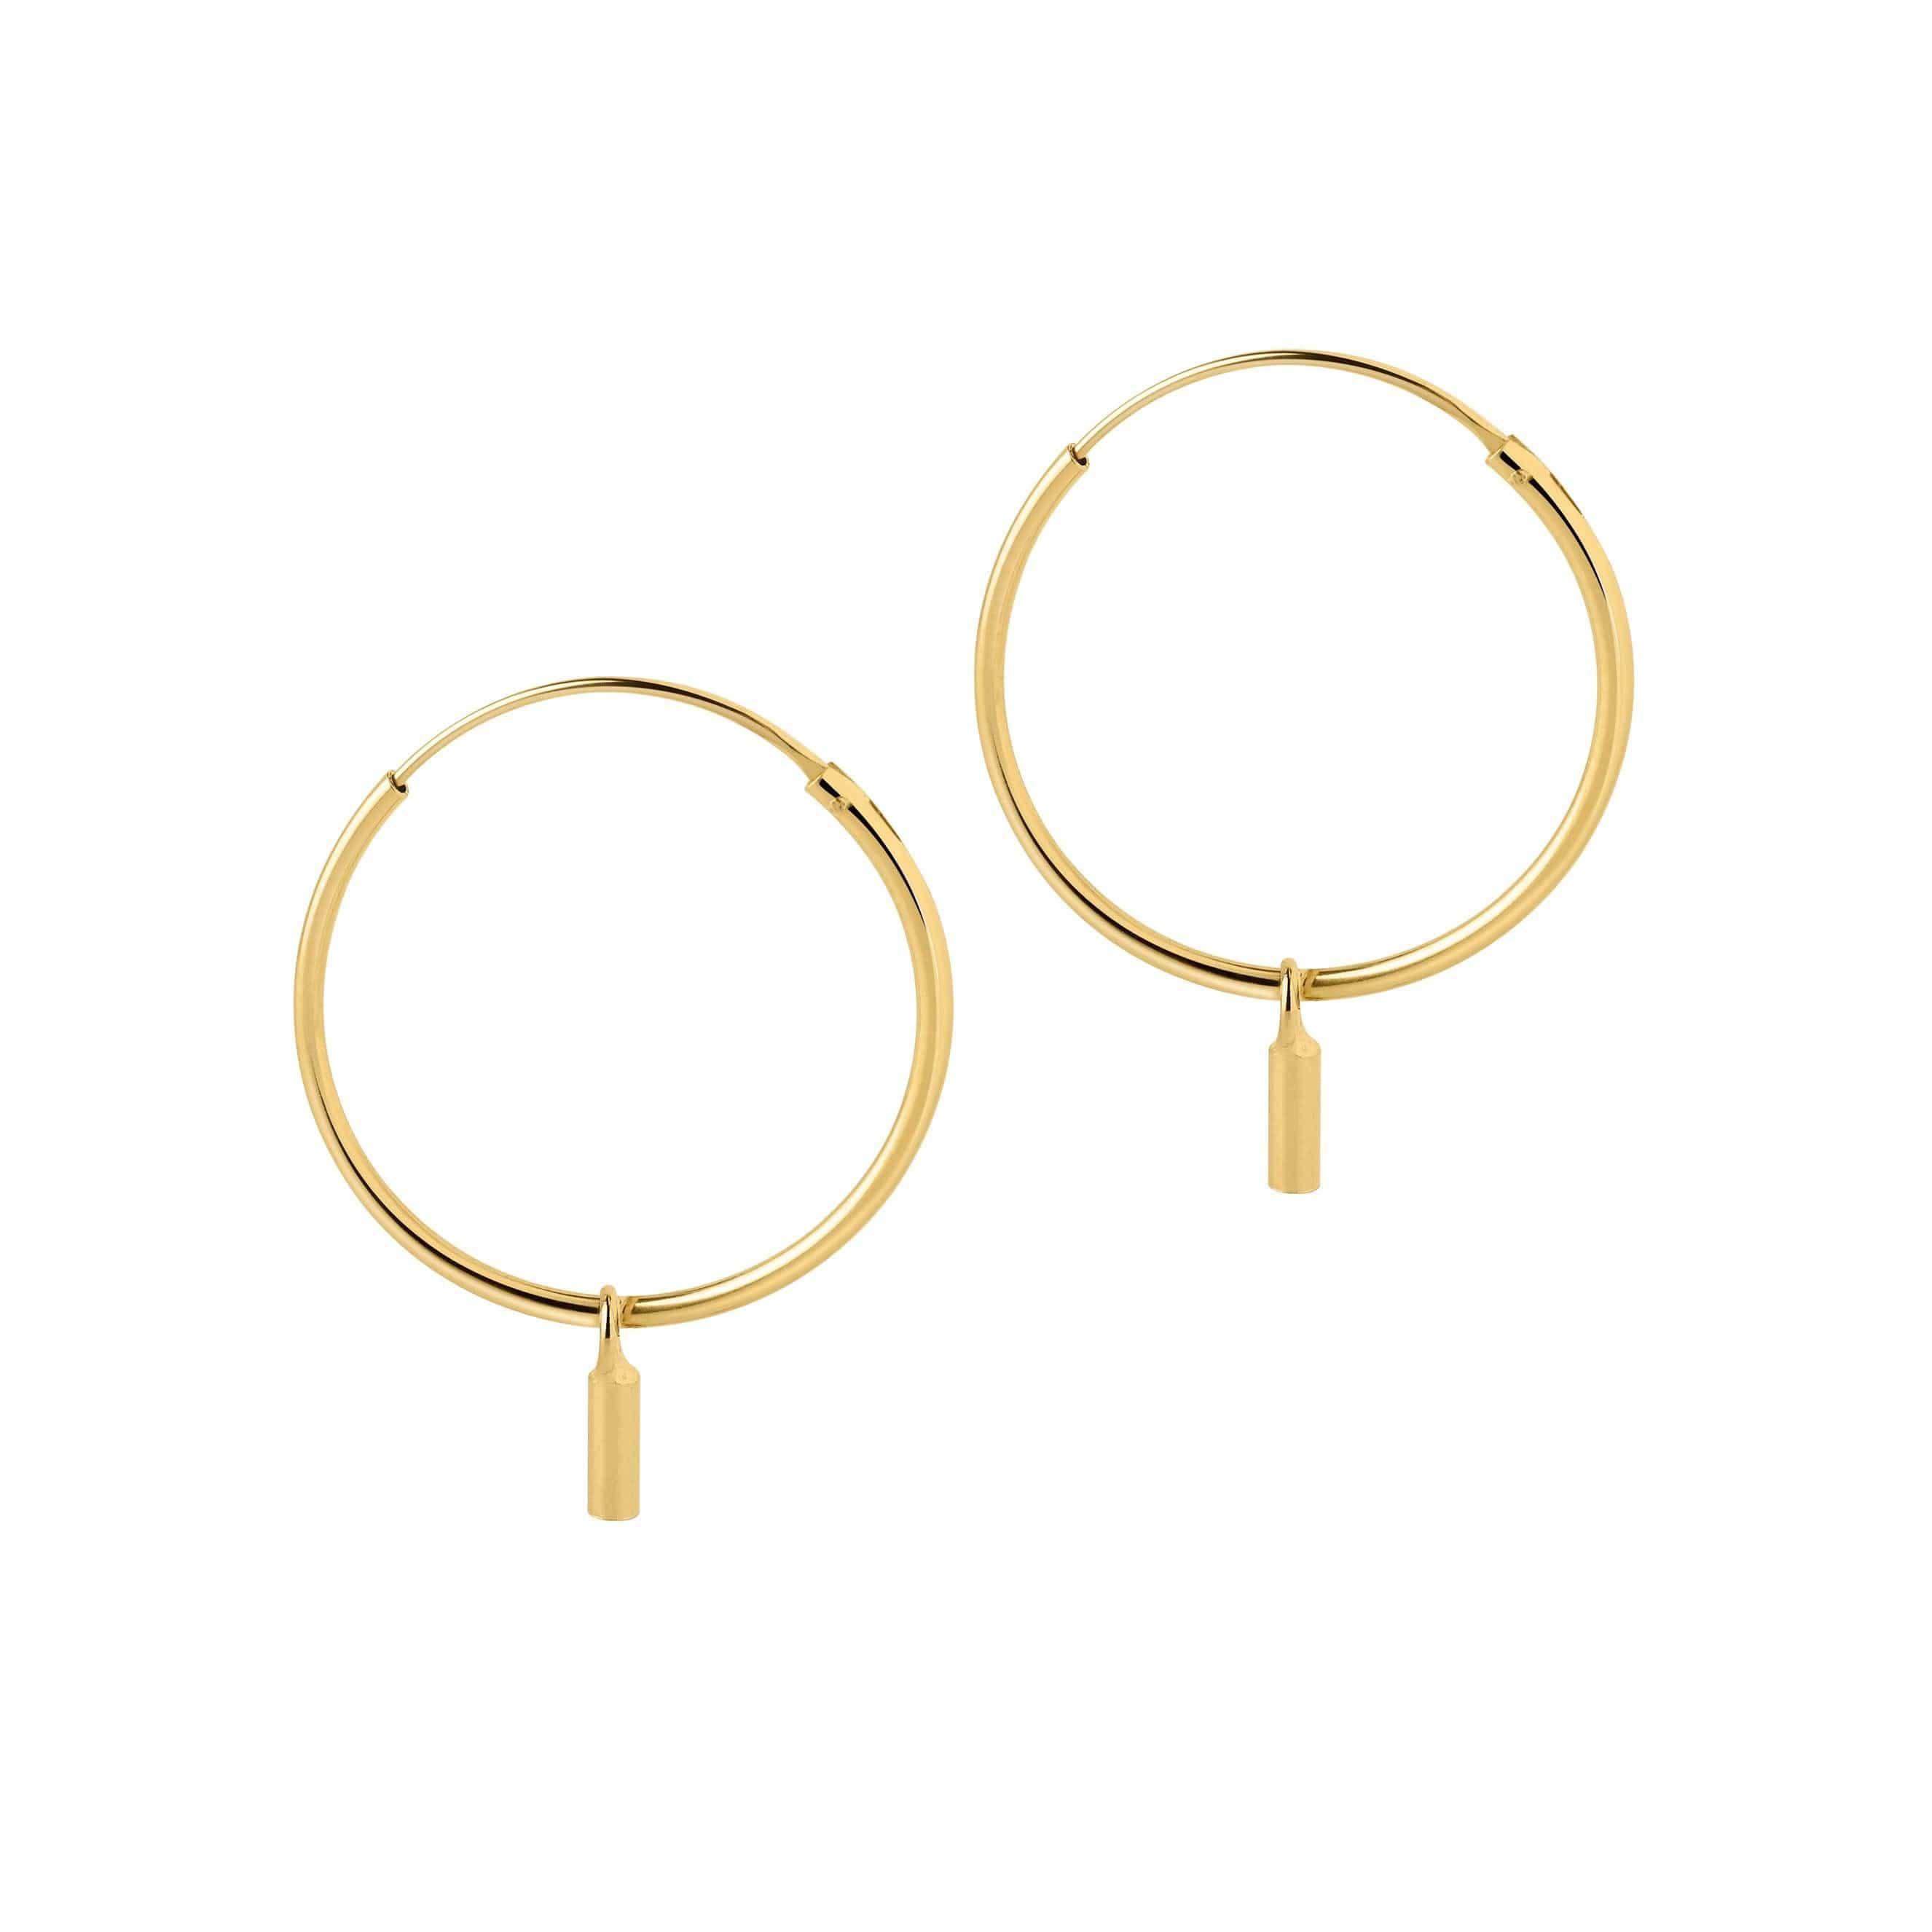 Hoop earrings gold plated with a rod pendant 22mm